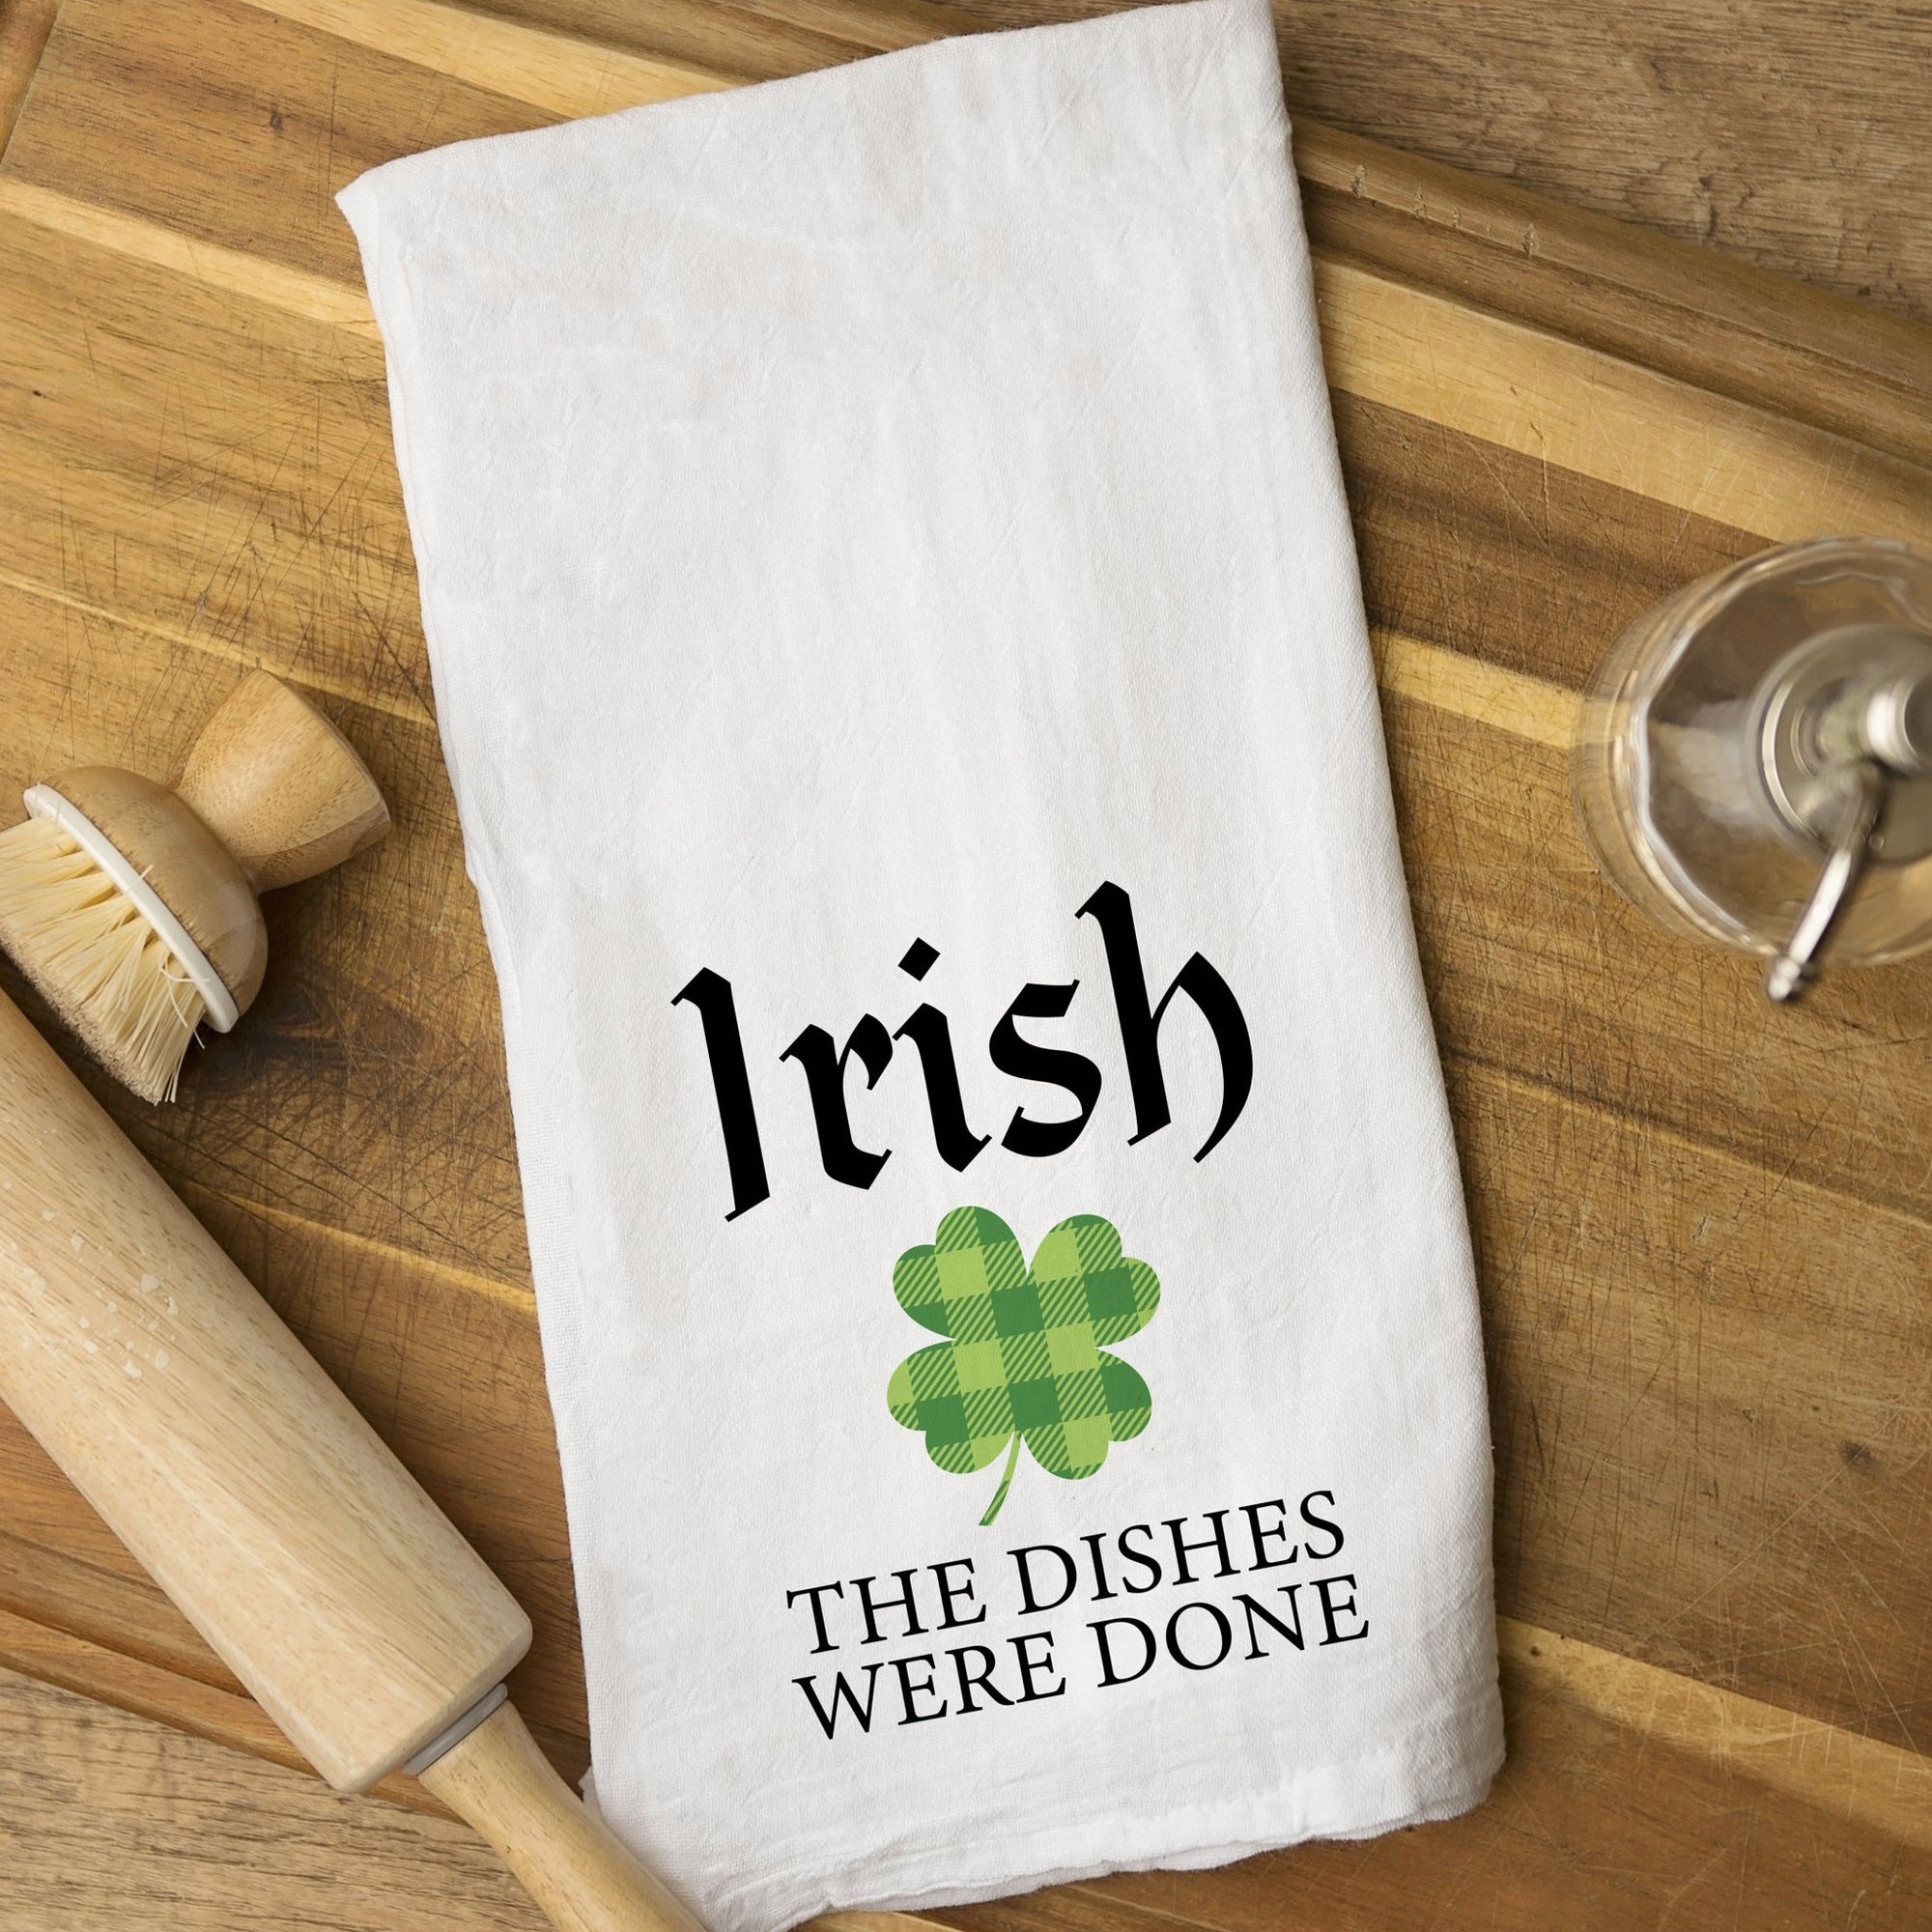 Irish the Dishes were done, St. Patrick's Day Kitchen Tea Towel, Hostess gift, PIPSY.COM